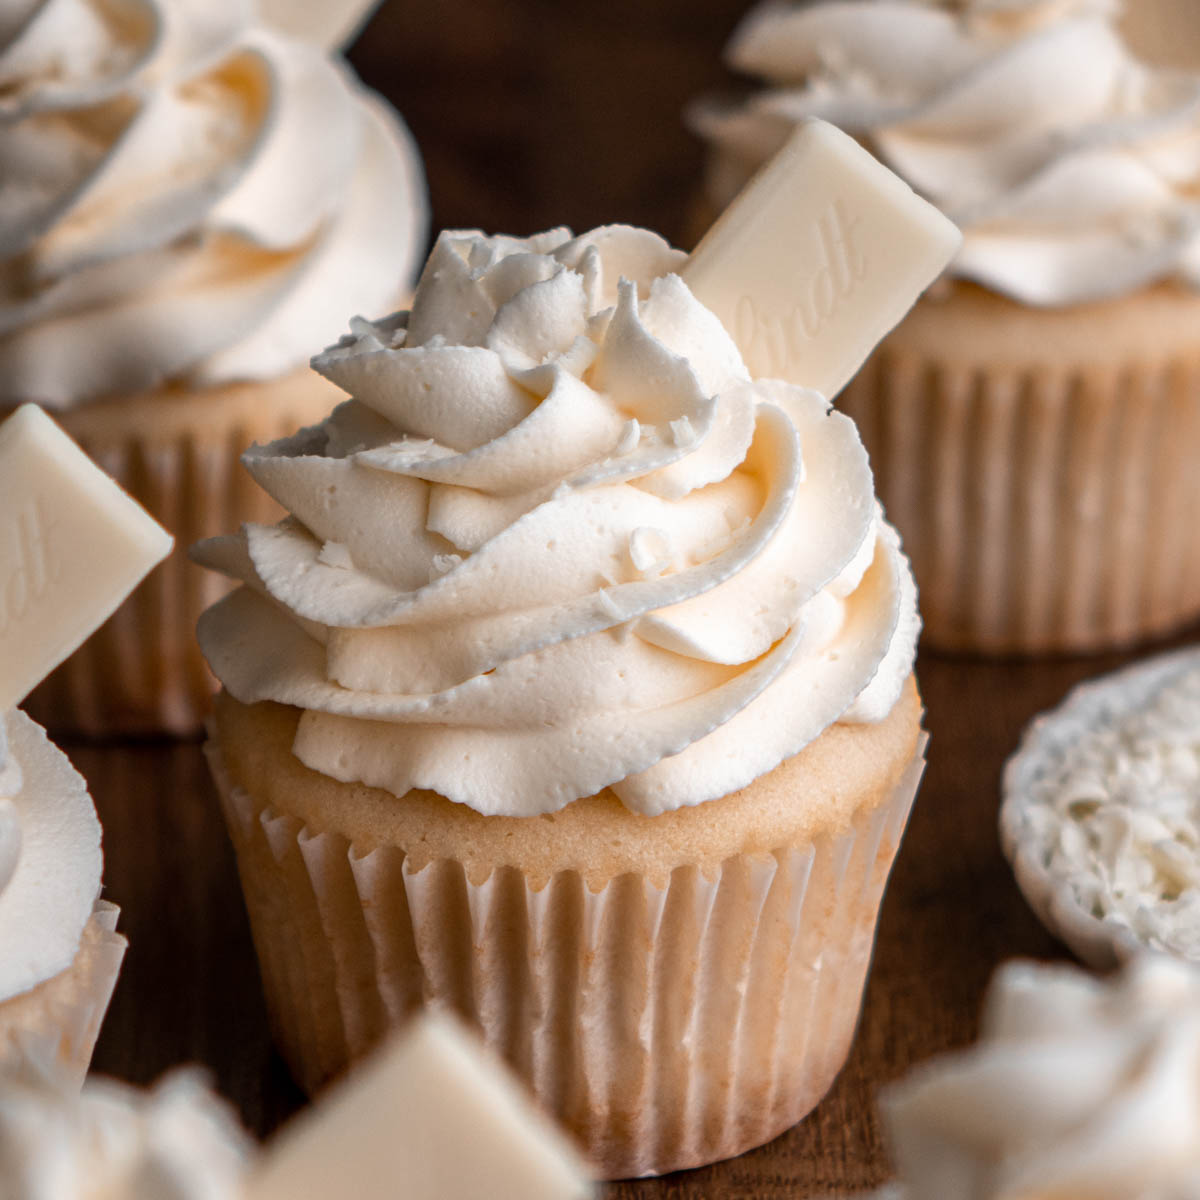 White Chocolate Cupcakes with Ganache Frosting